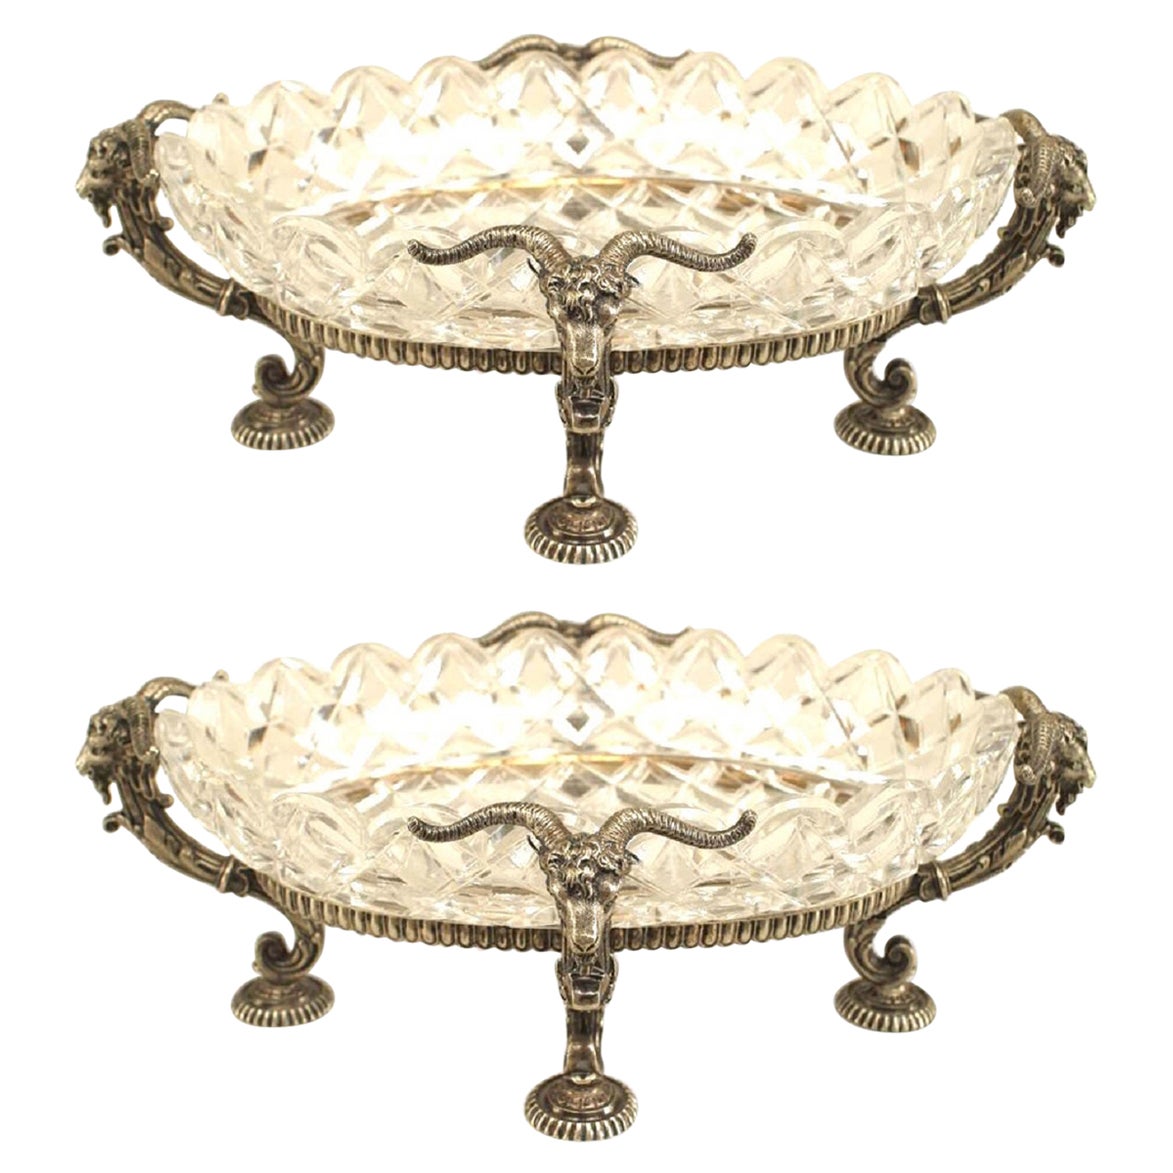 Pair of French Victorian Compotes with Silver Plated Rams' Heads